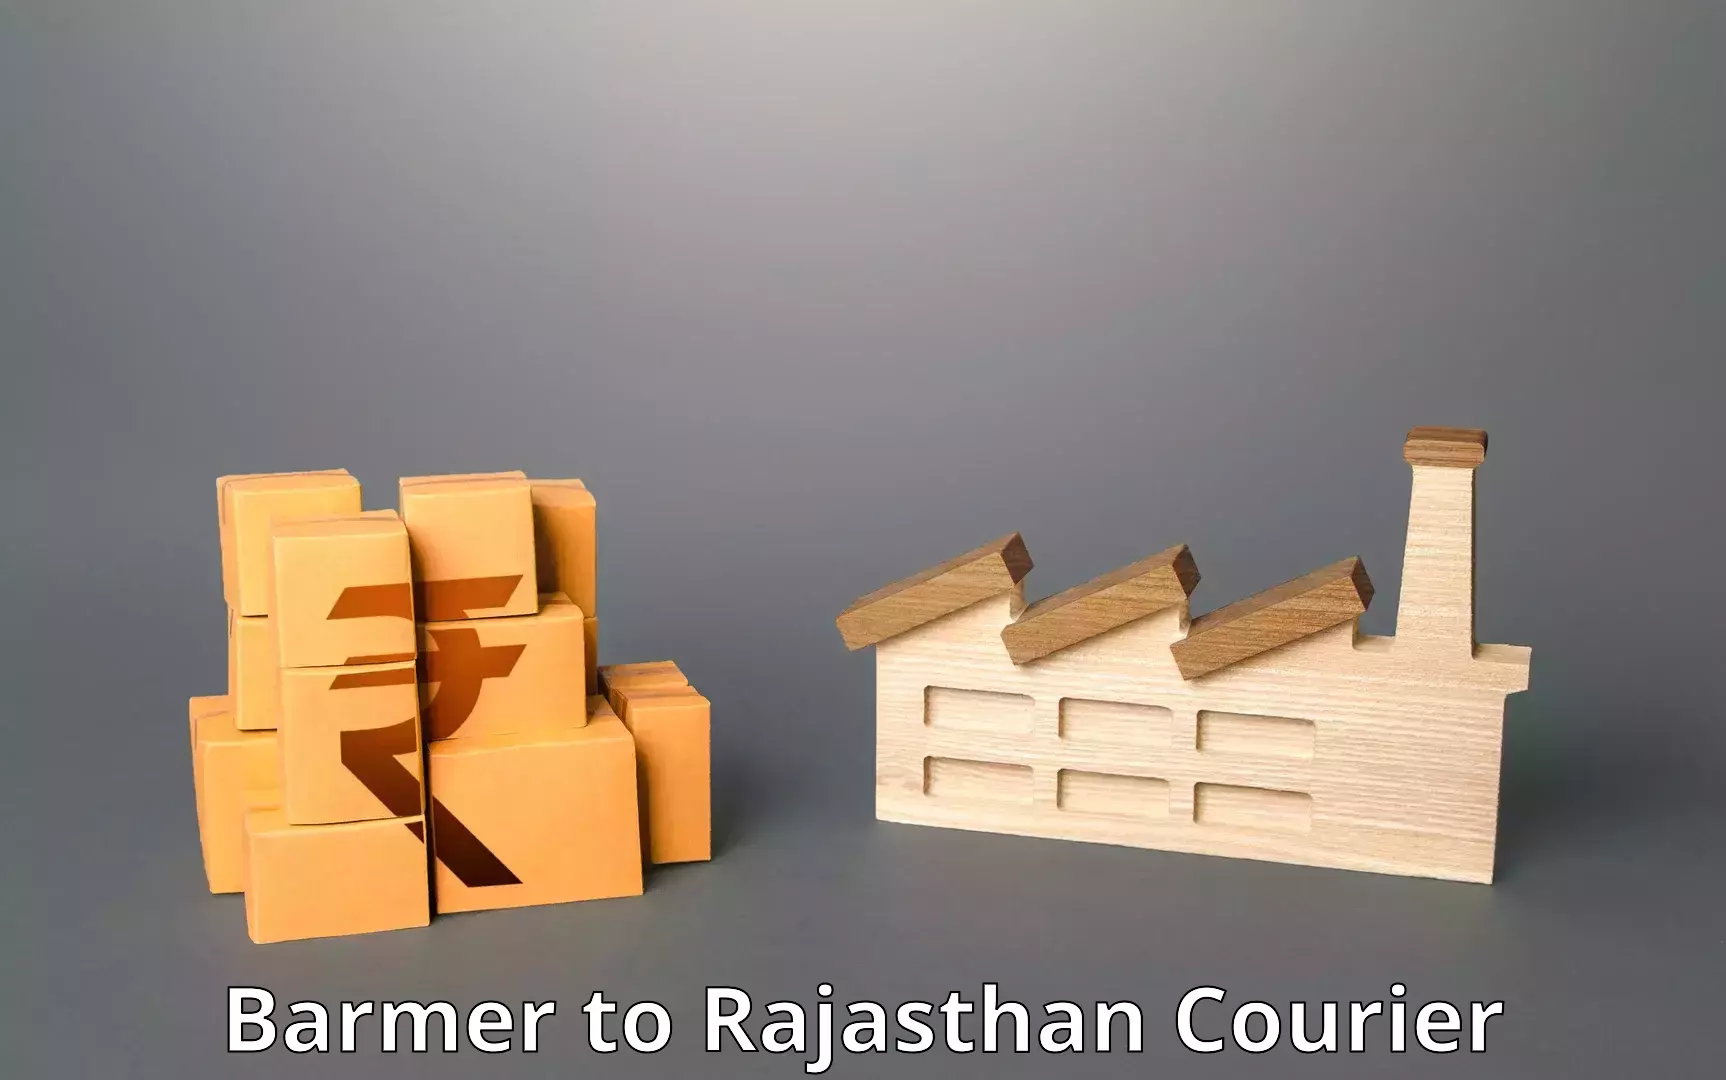 Advanced courier platforms Barmer to Rajasthan